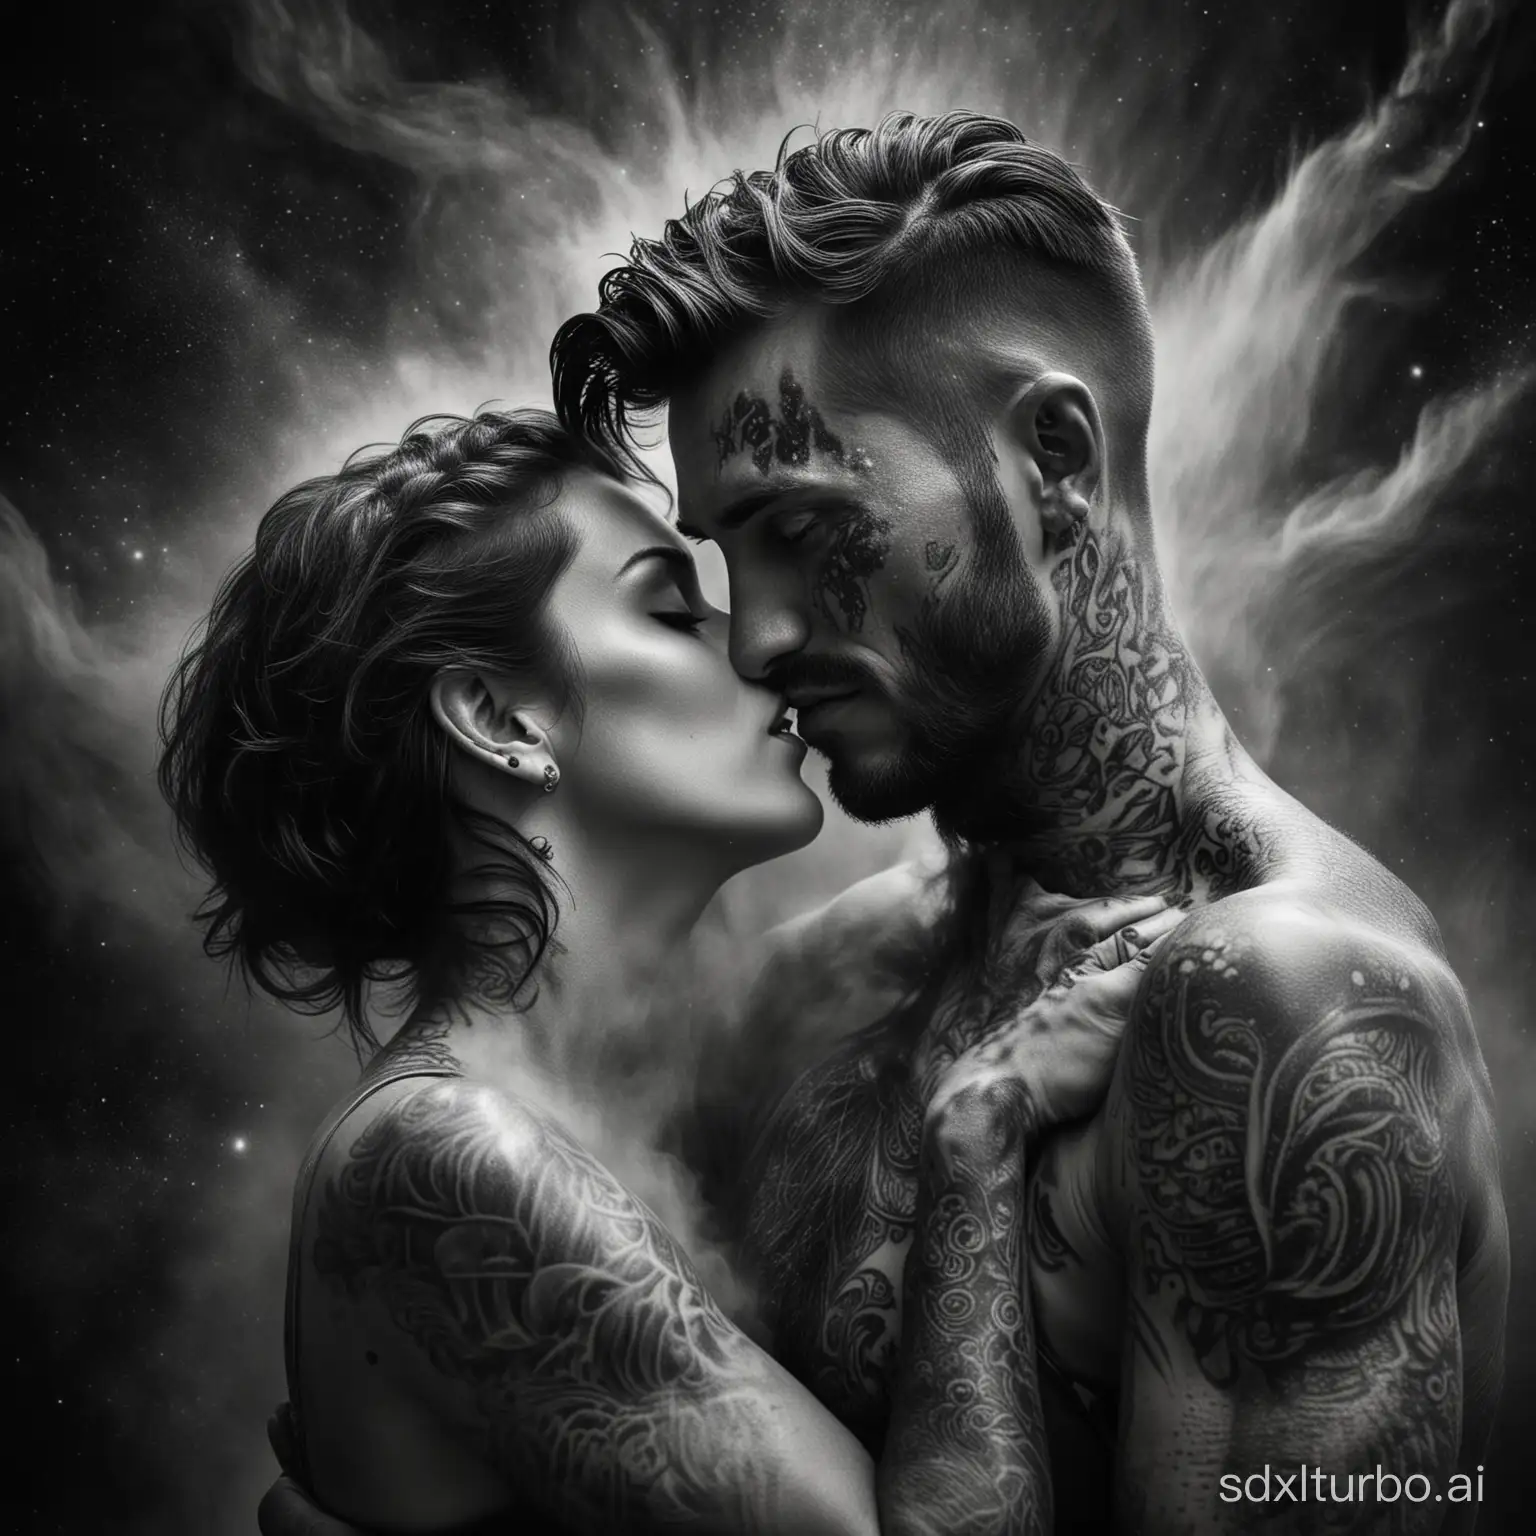 Tattooed-Man-Embracing-Woman-in-Space-Dust-Storm-CloseUp